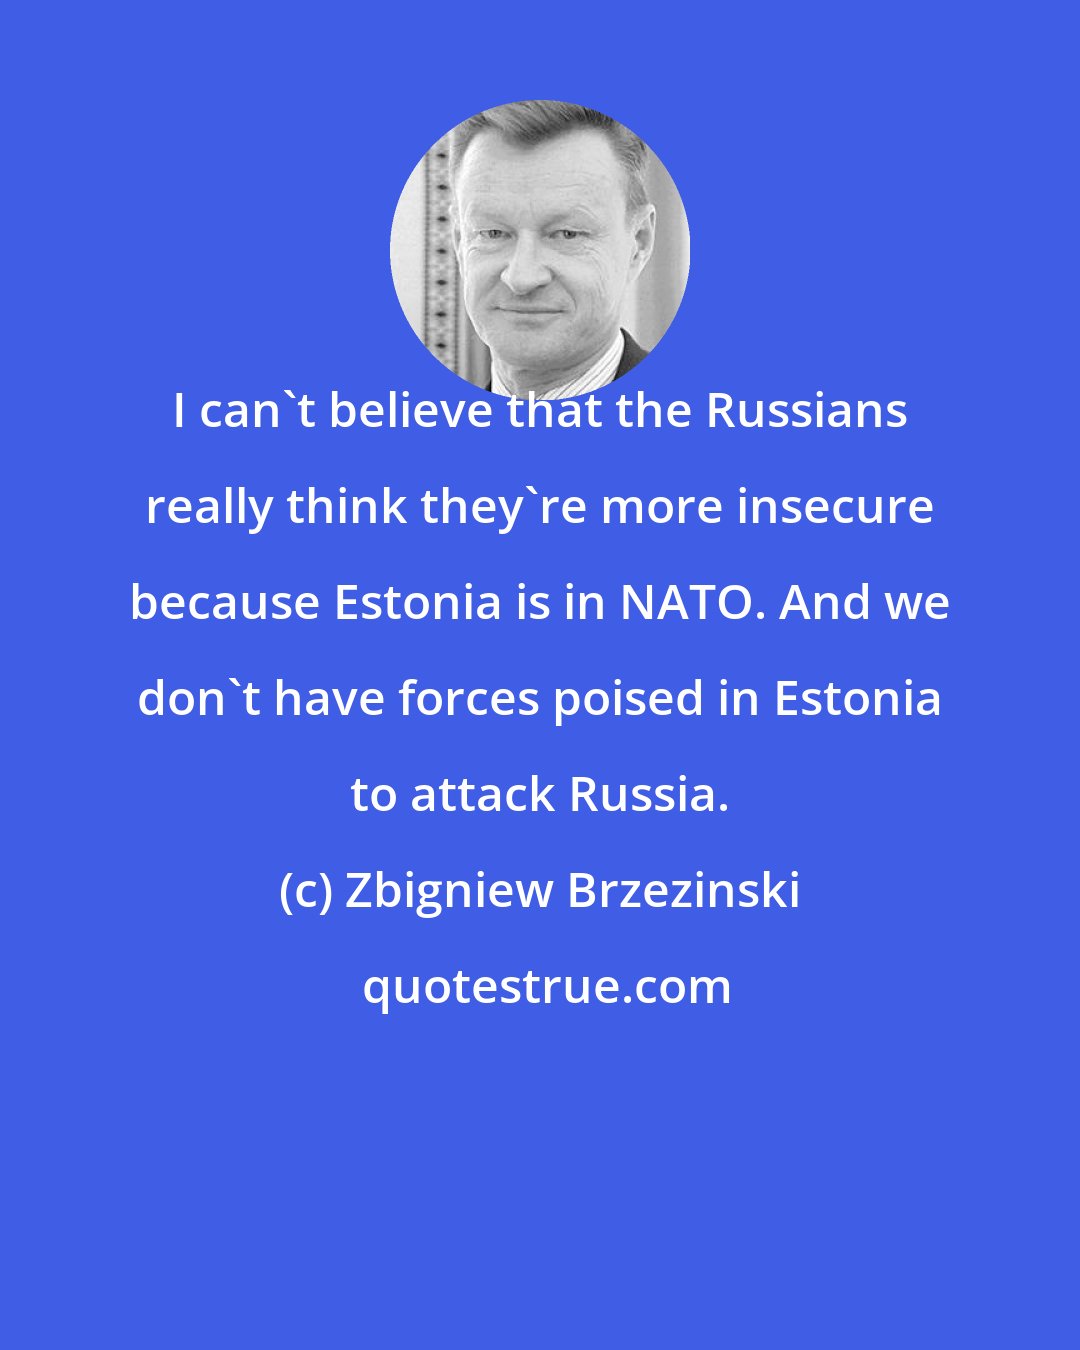 Zbigniew Brzezinski: I can't believe that the Russians really think they're more insecure because Estonia is in NATO. And we don't have forces poised in Estonia to attack Russia.